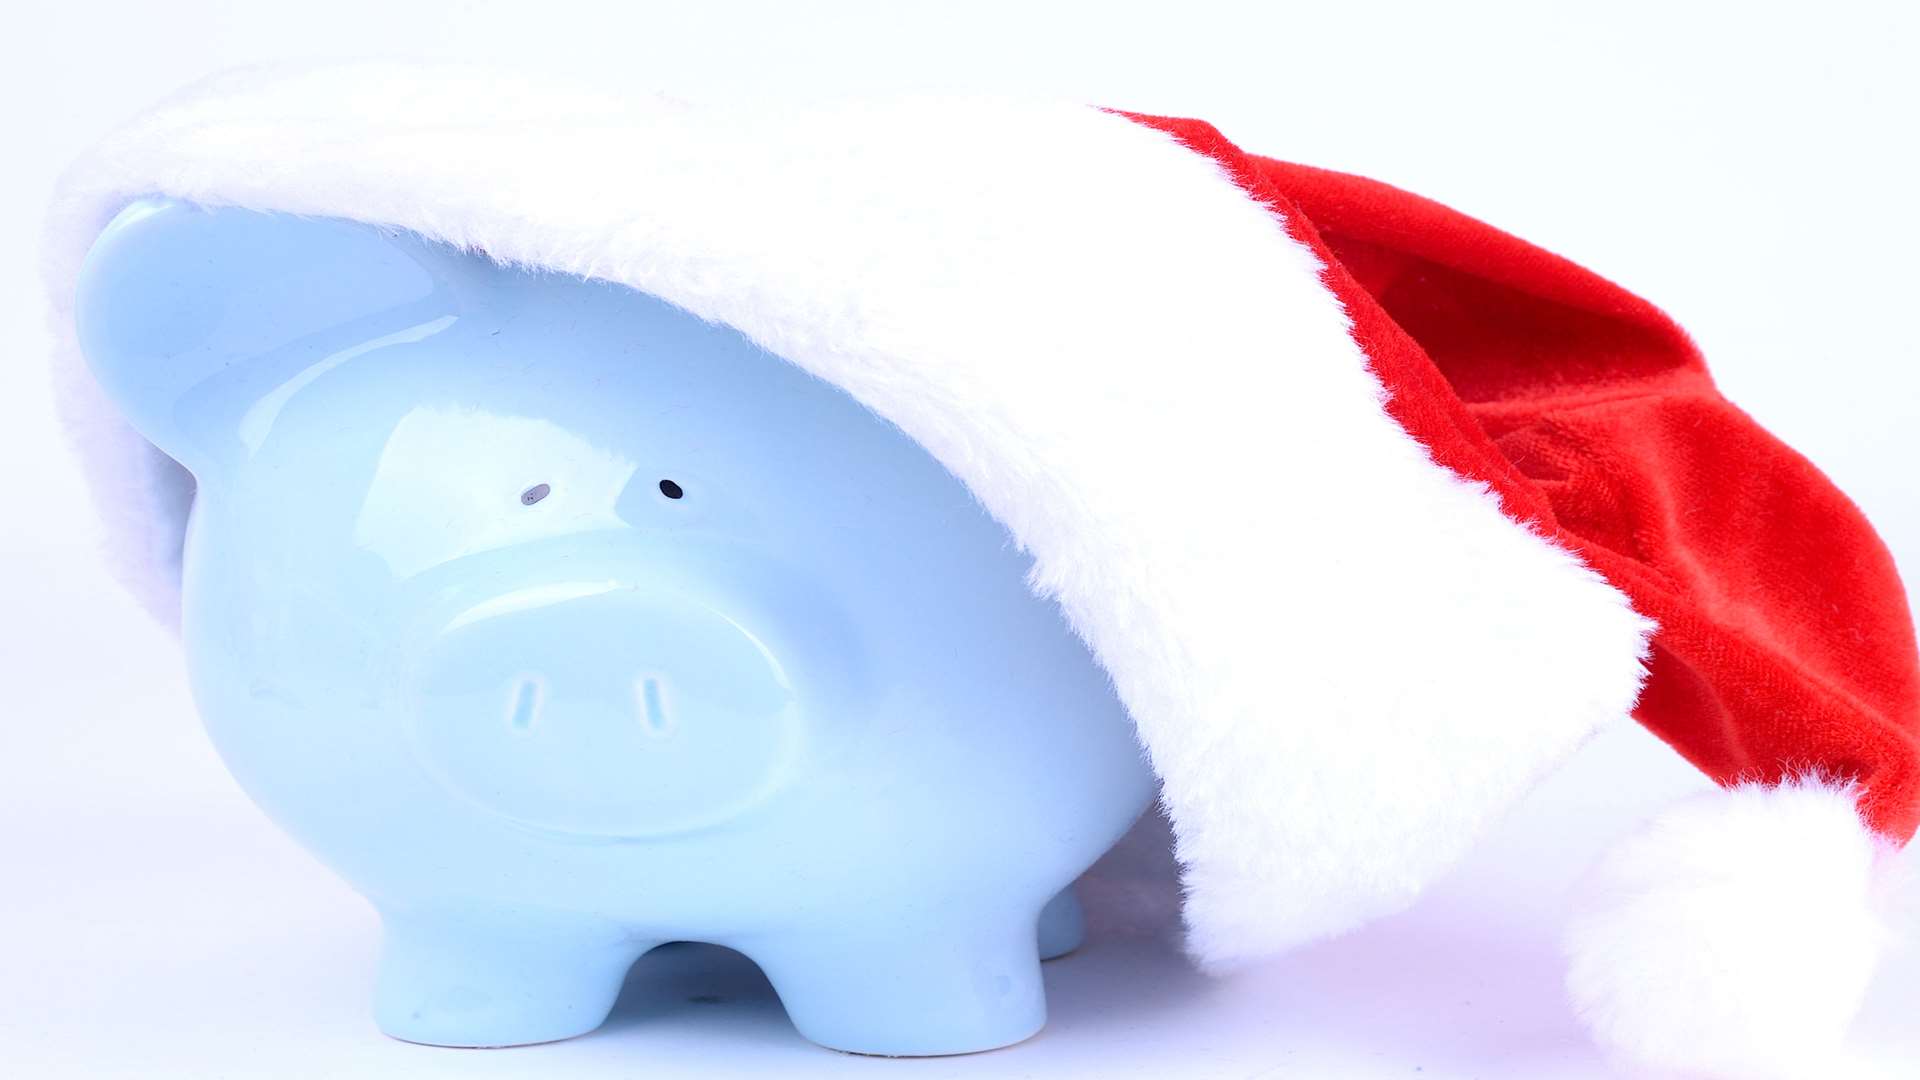 Nearly a third of people admitted spending more on Christmas last year than they did in 2014